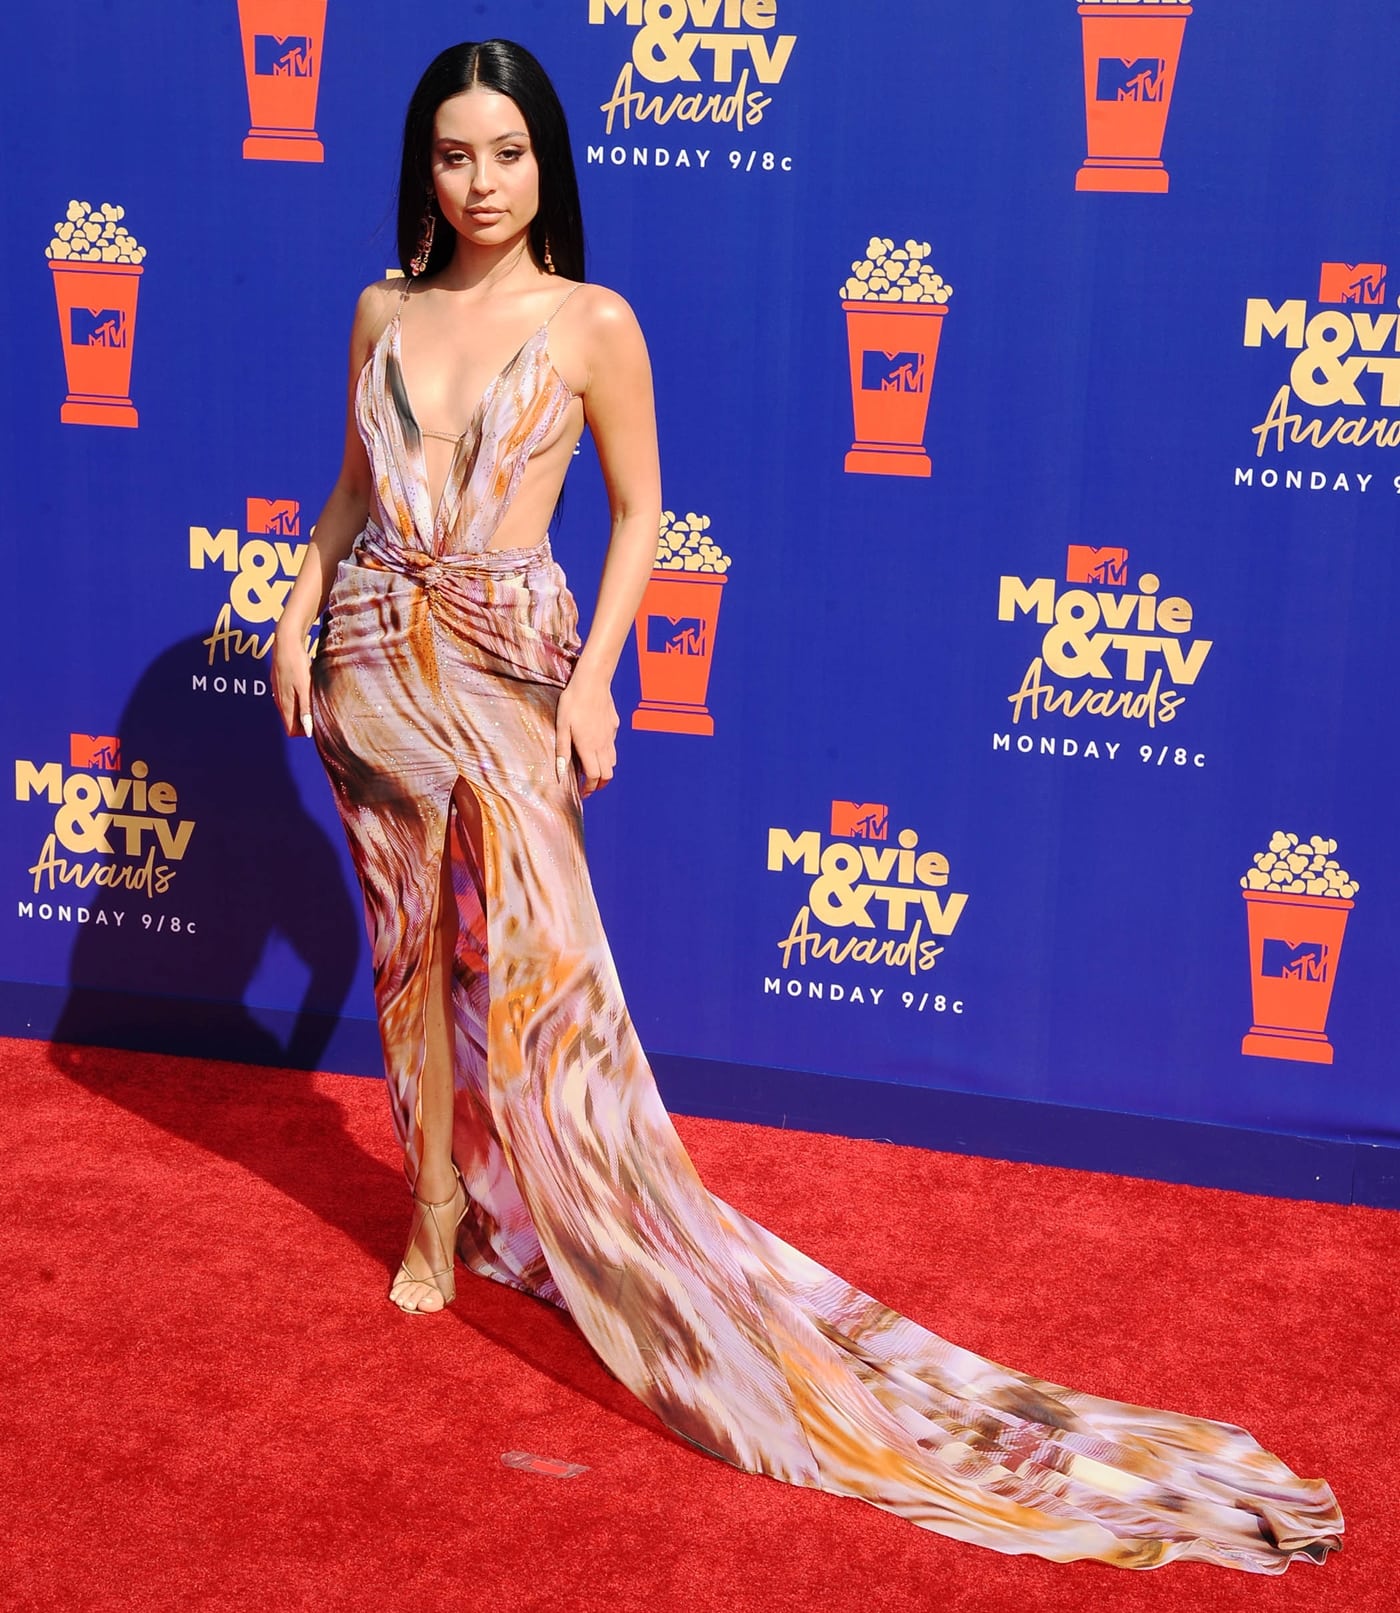 Alexa Demie flaunts her legs in a cutout Angelina Colarusso gown at the 2019 MTV Movie and TV Awards